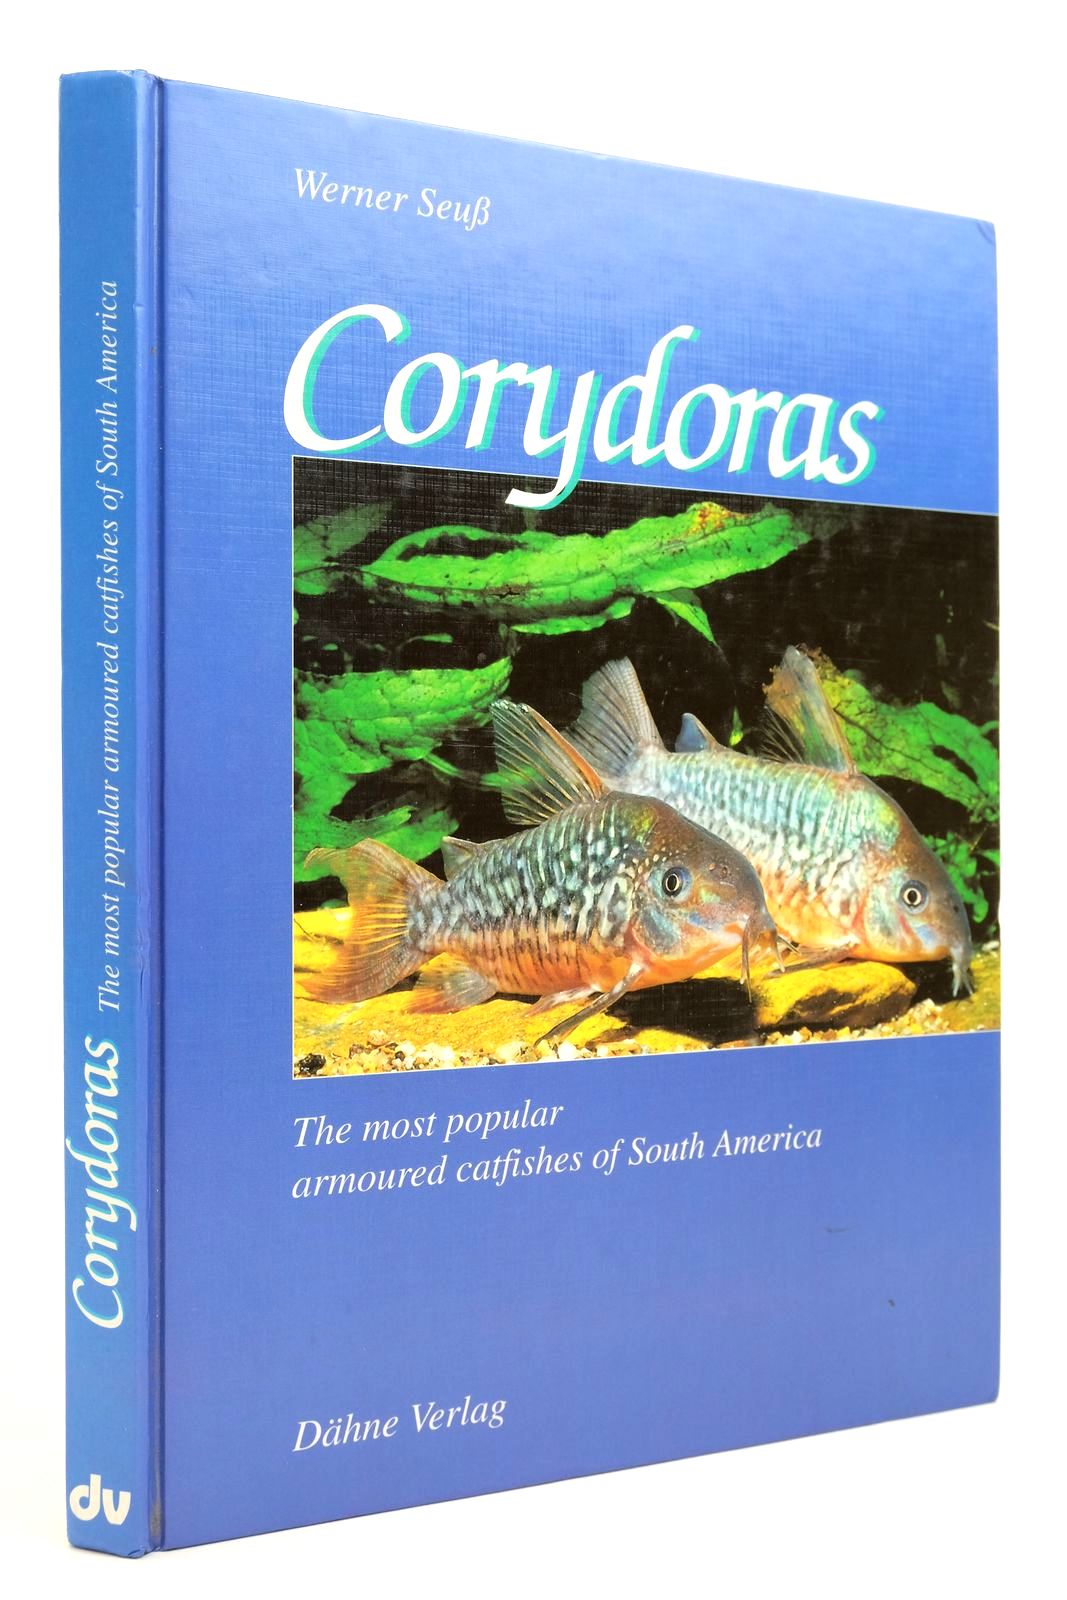 Photo of CORYDORAS: THE MOST POPULAR ARMOURED CATFISHES OF SOUTH AMERICA written by Seuss, Warner published by Dahne Verlag (STOCK CODE: 2139528)  for sale by Stella & Rose's Books